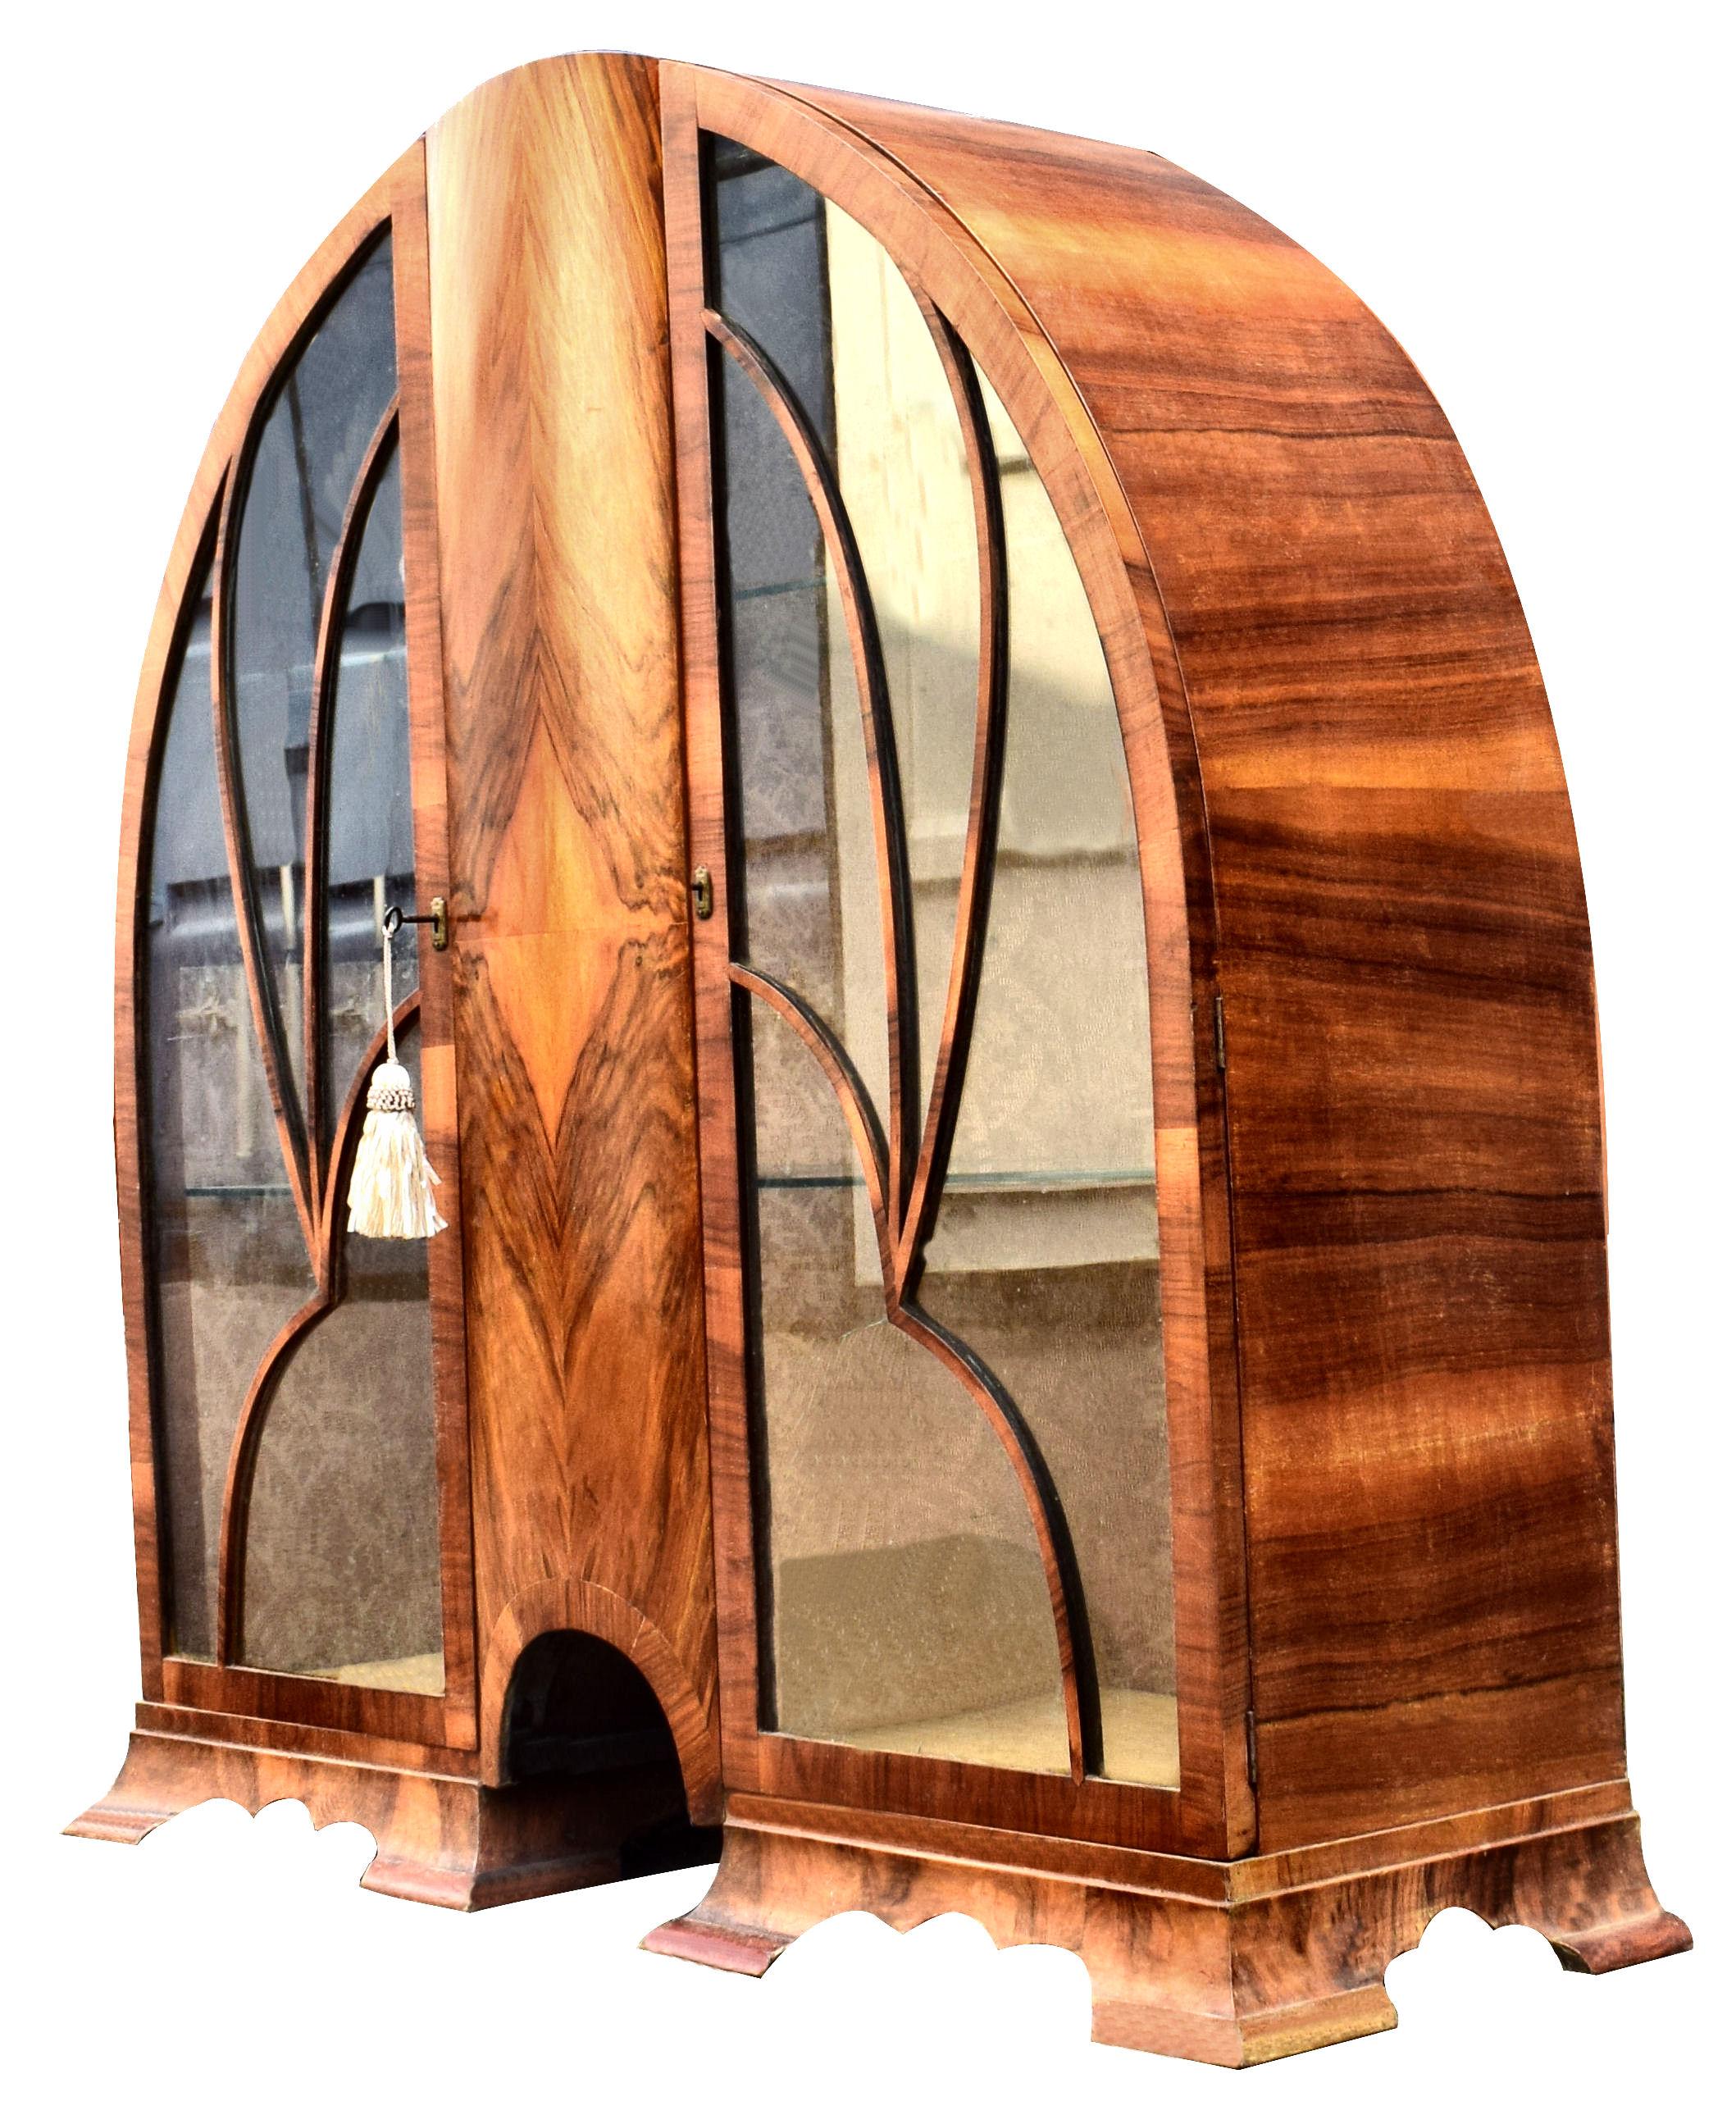 Superb 1930s Art Deco walnut cathedral display cabinet. Gorgeous mid to light tone walnut veneers, still with original working key and two glass shelves. Generously spaced interior, still with its original silk lined backing which is a champagne